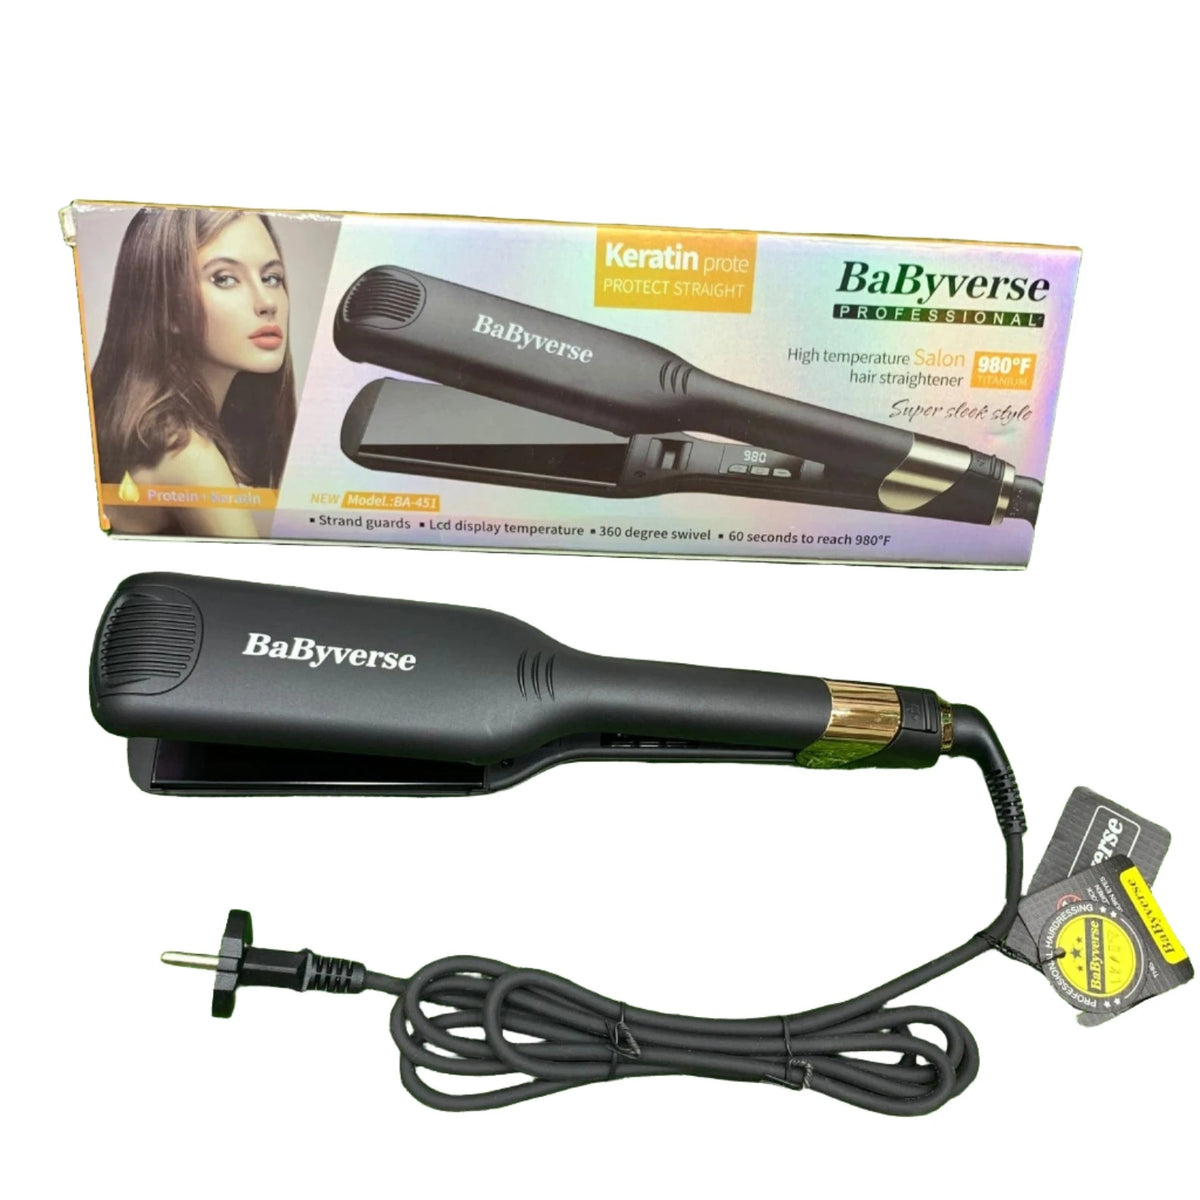 Babyverse Professional Keratin Prote Protect Hair Straightener 980F